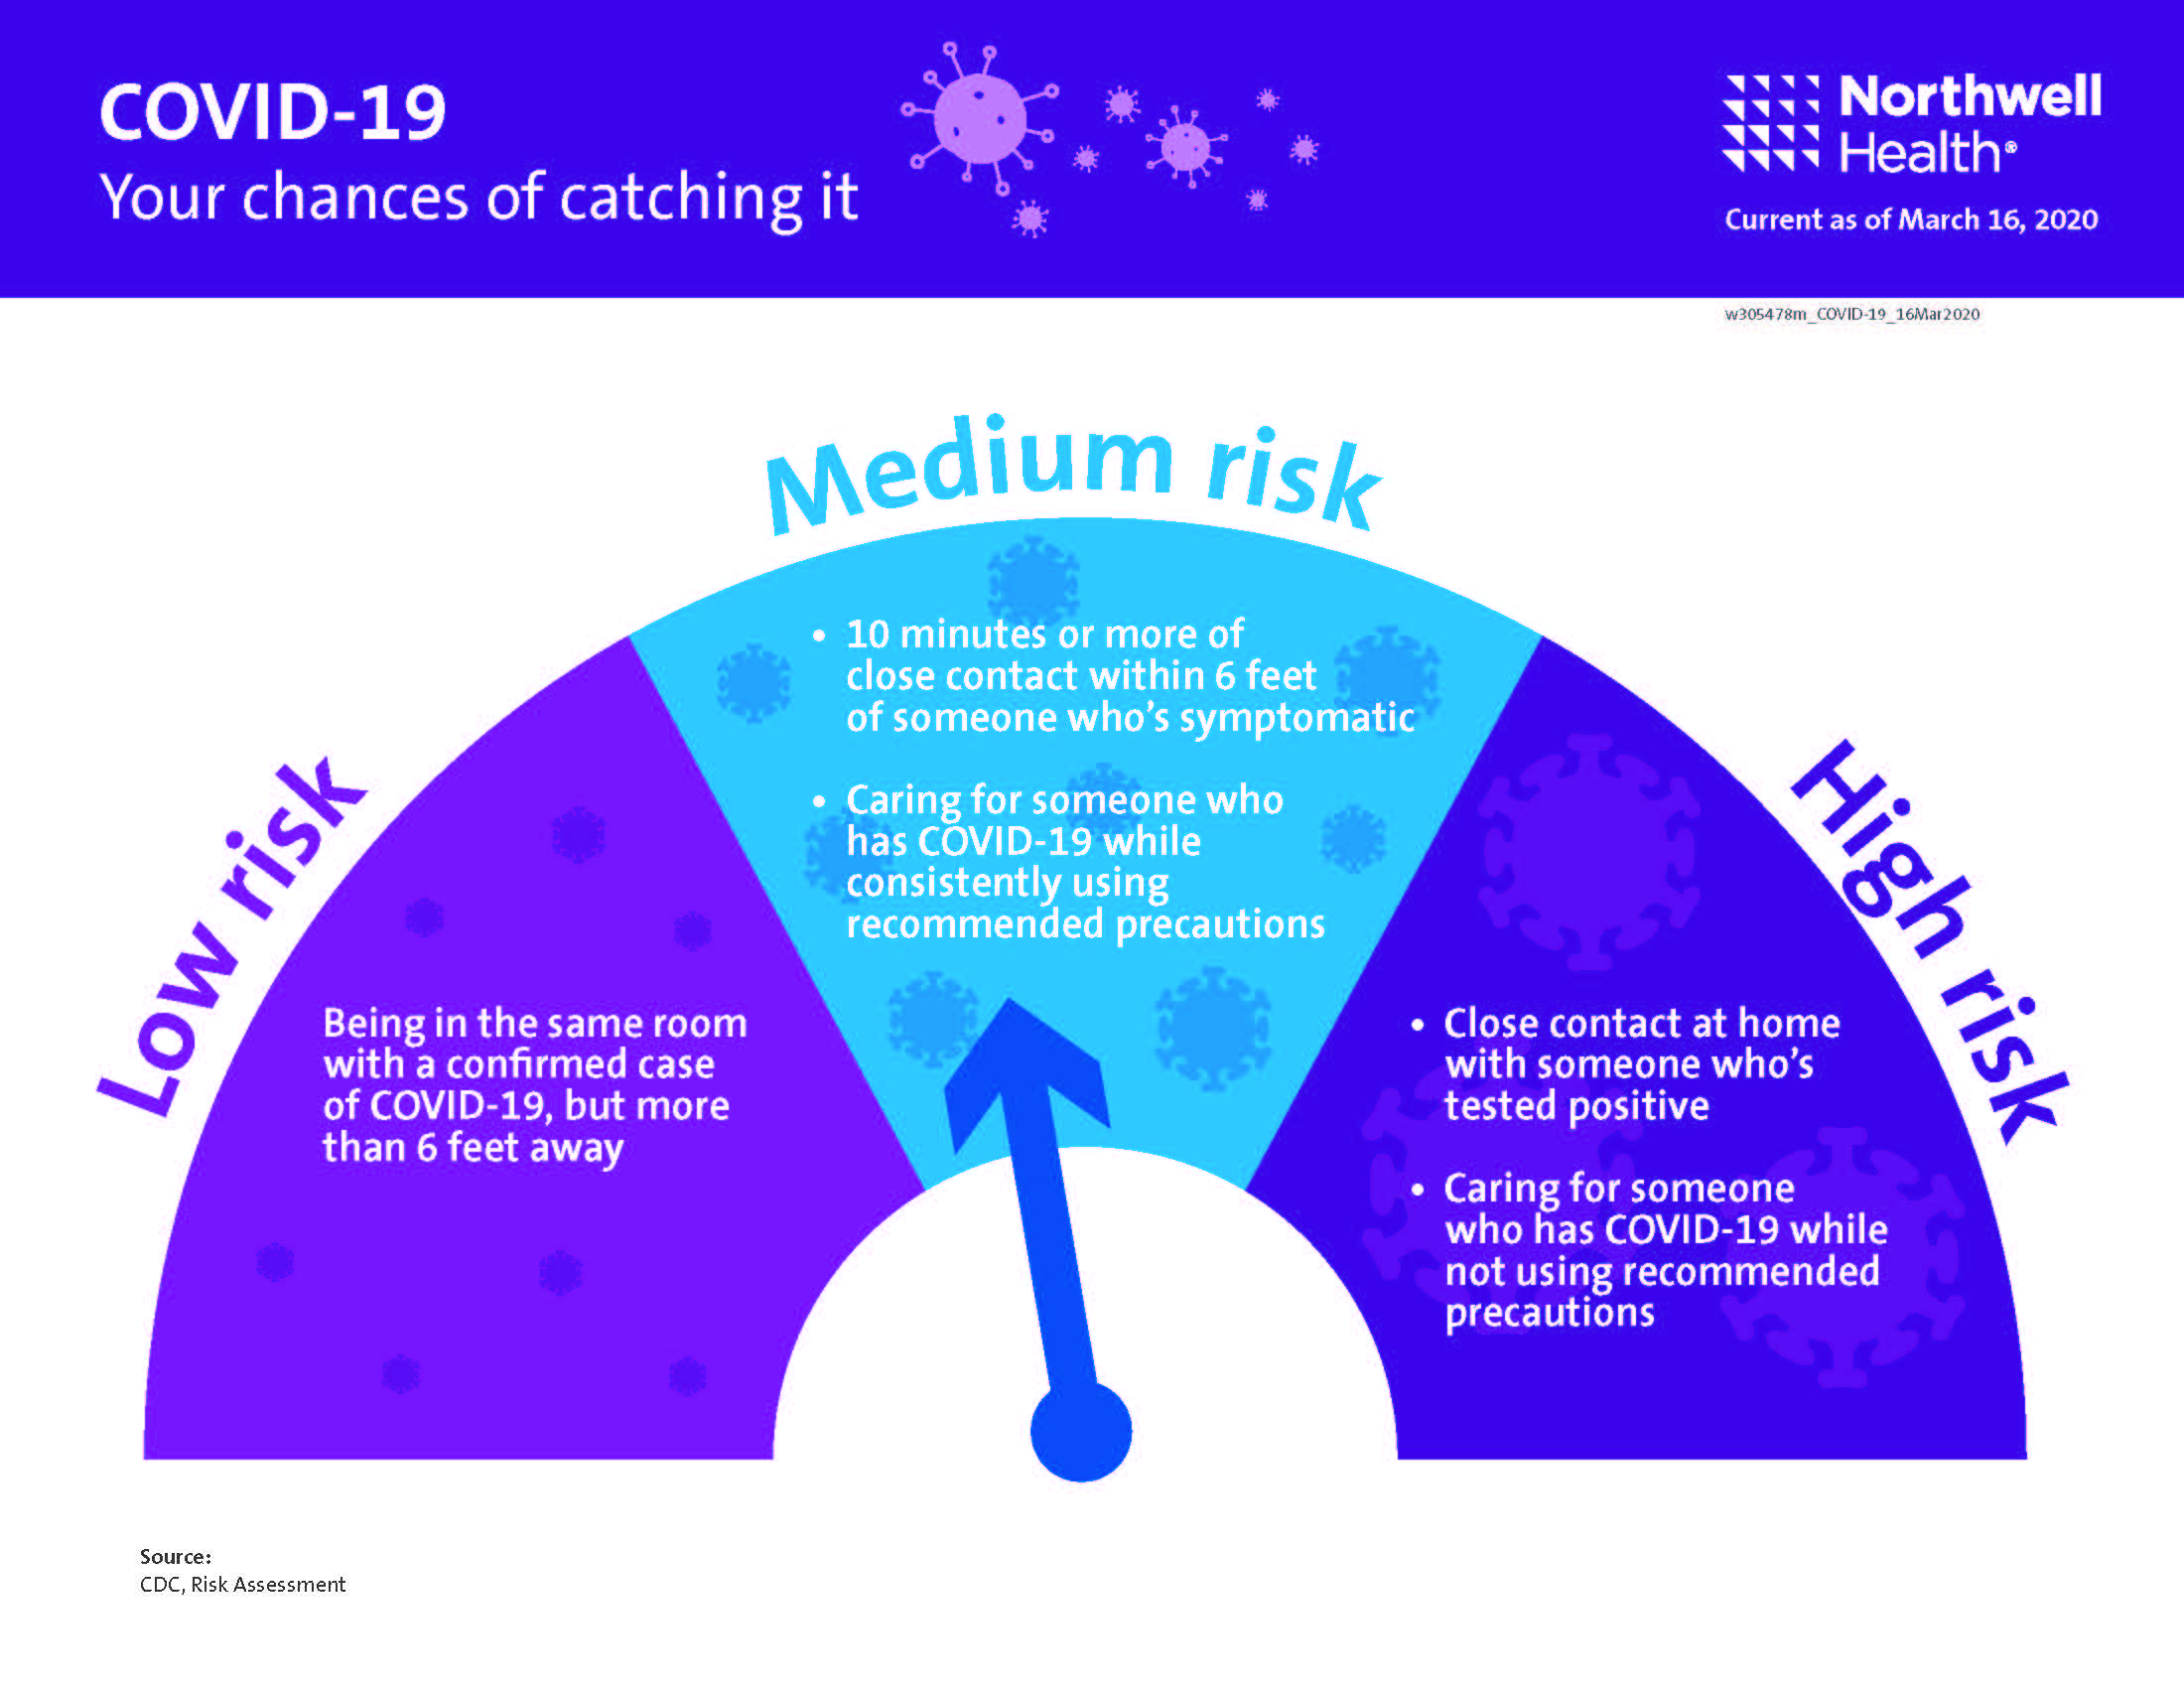 Your risk of catching COVID-19